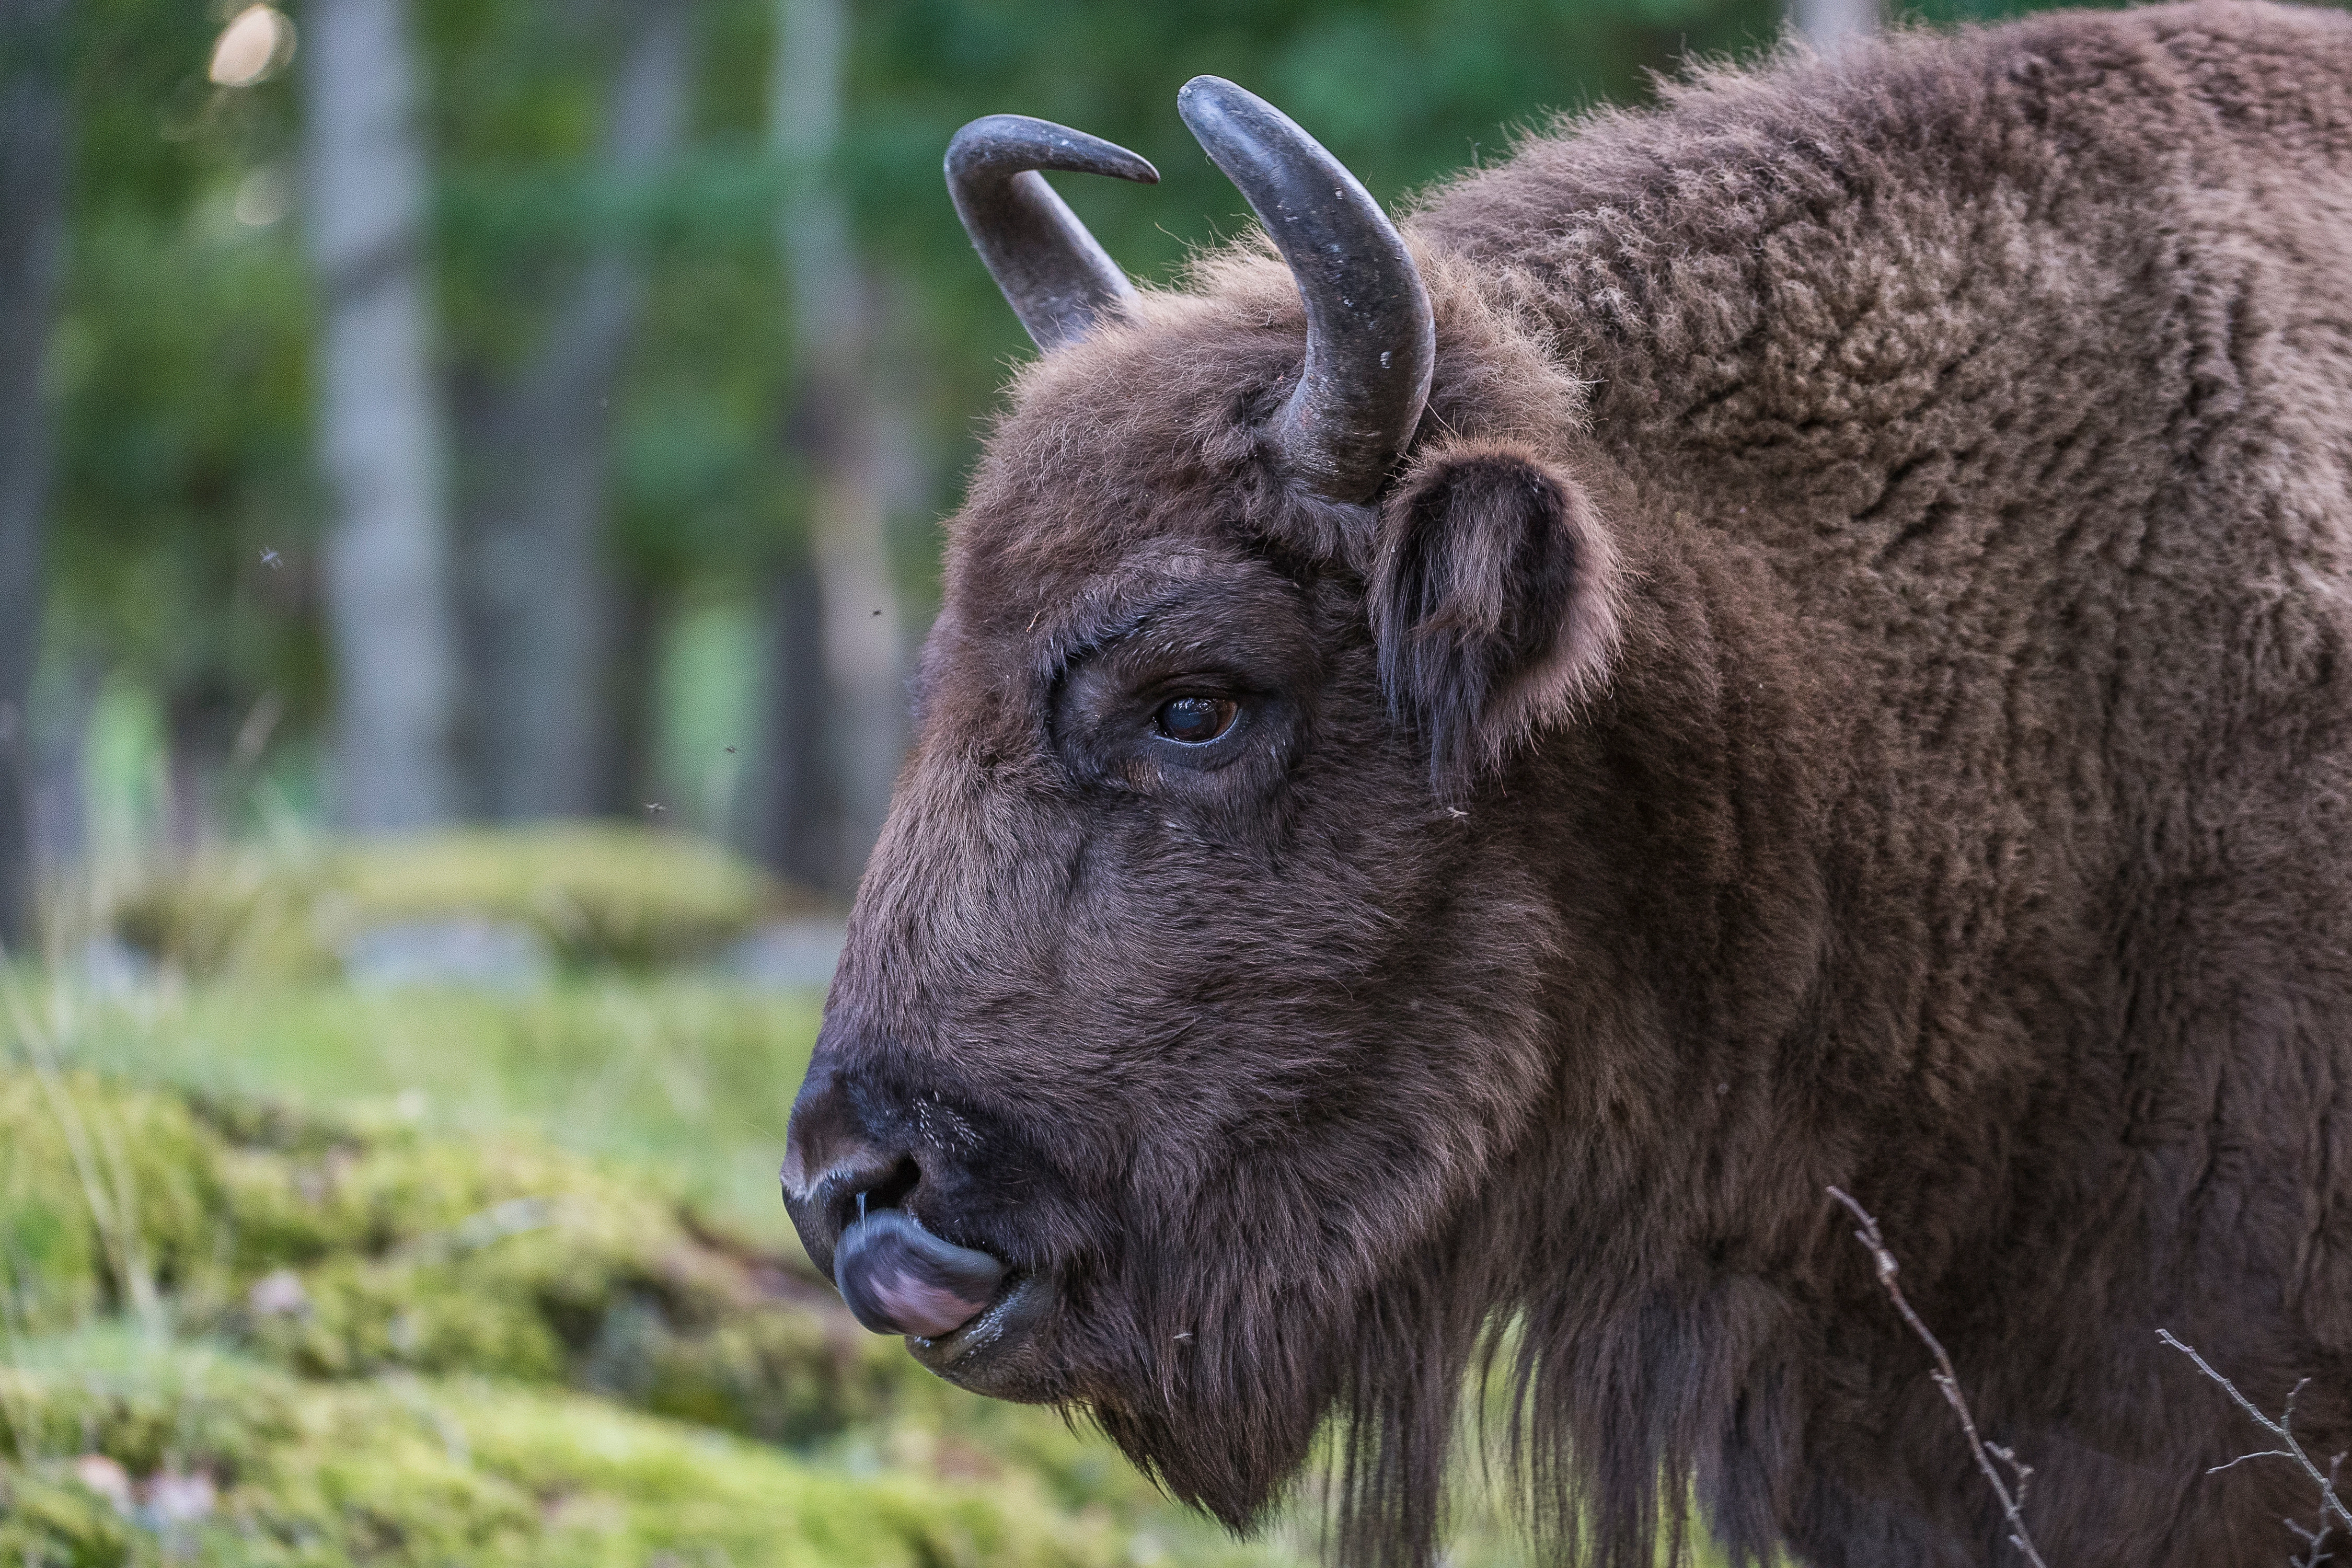 Euopese Bison of wisent